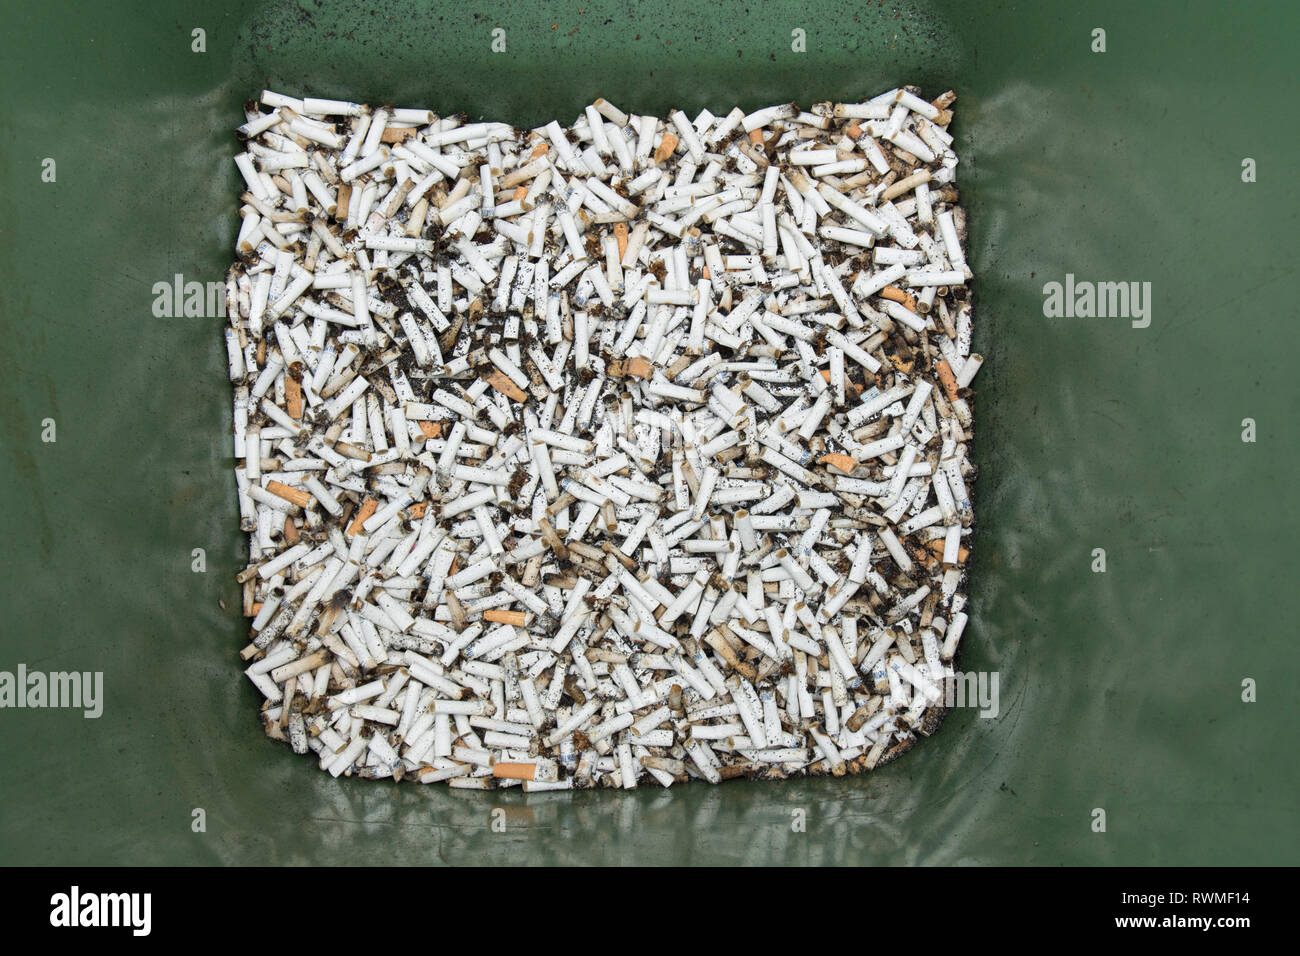 Bin full of cigaret ends, butts, most half smoked, in wheelie bin. Many cigarette butts. Stock Photo